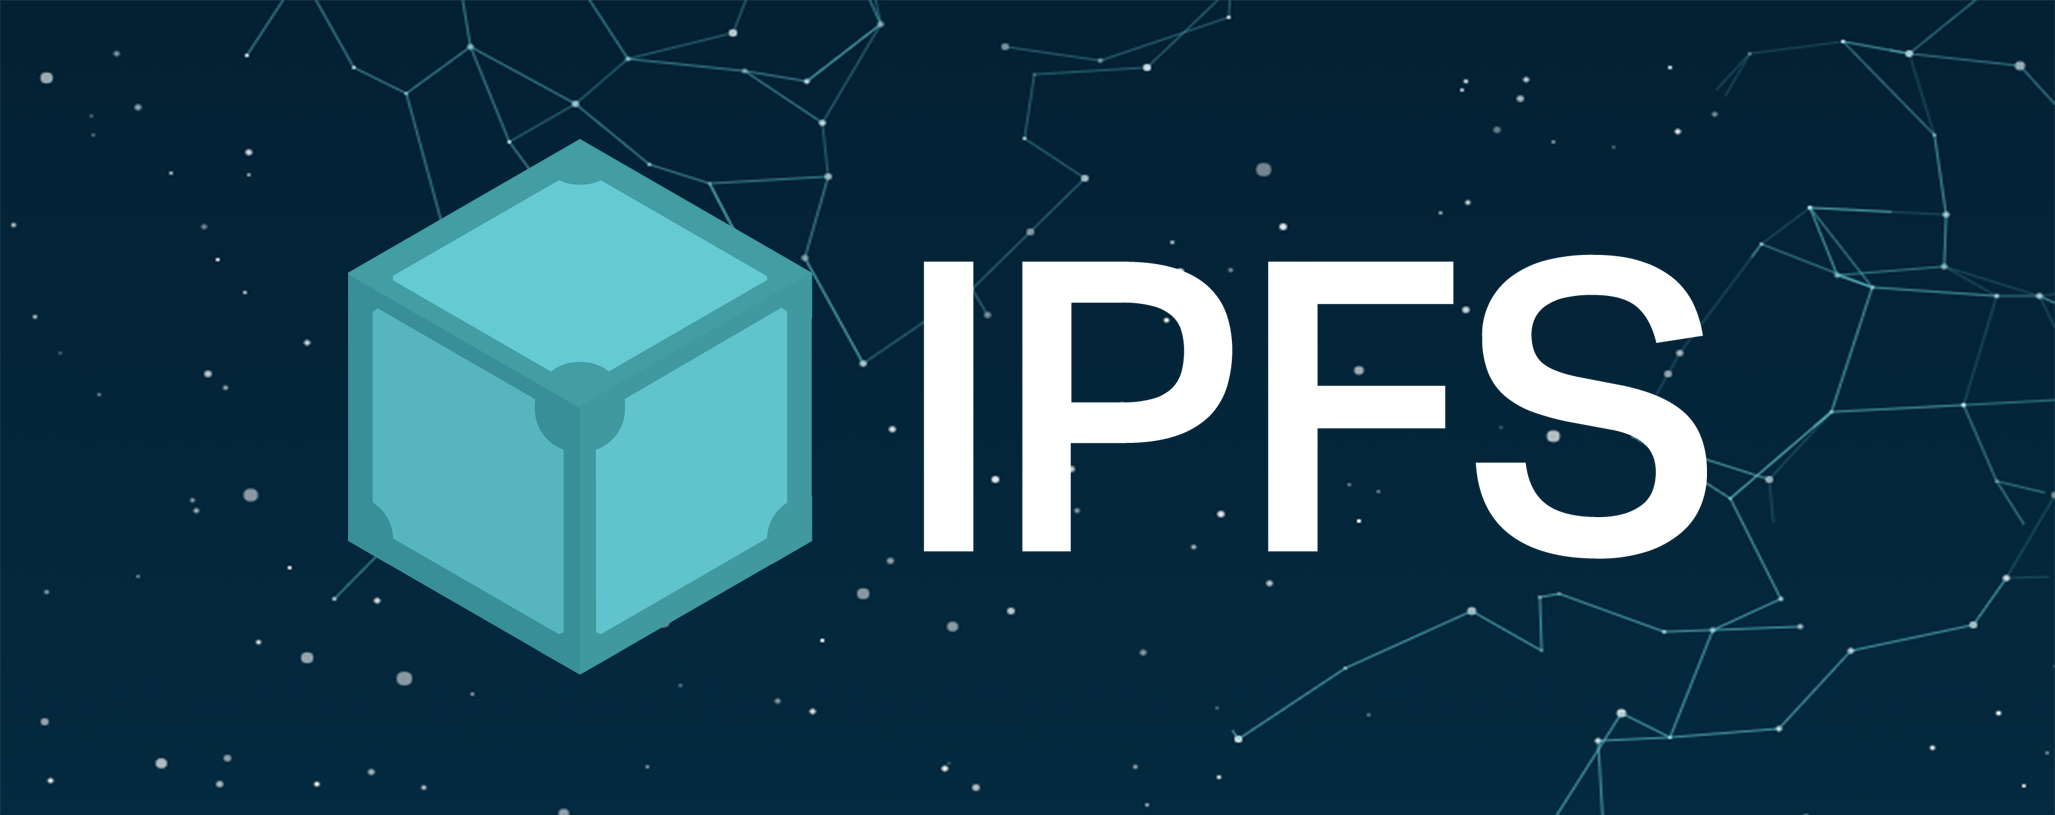 Interplanetary File System (IPFS) is a decentralized storage system based on content addressing